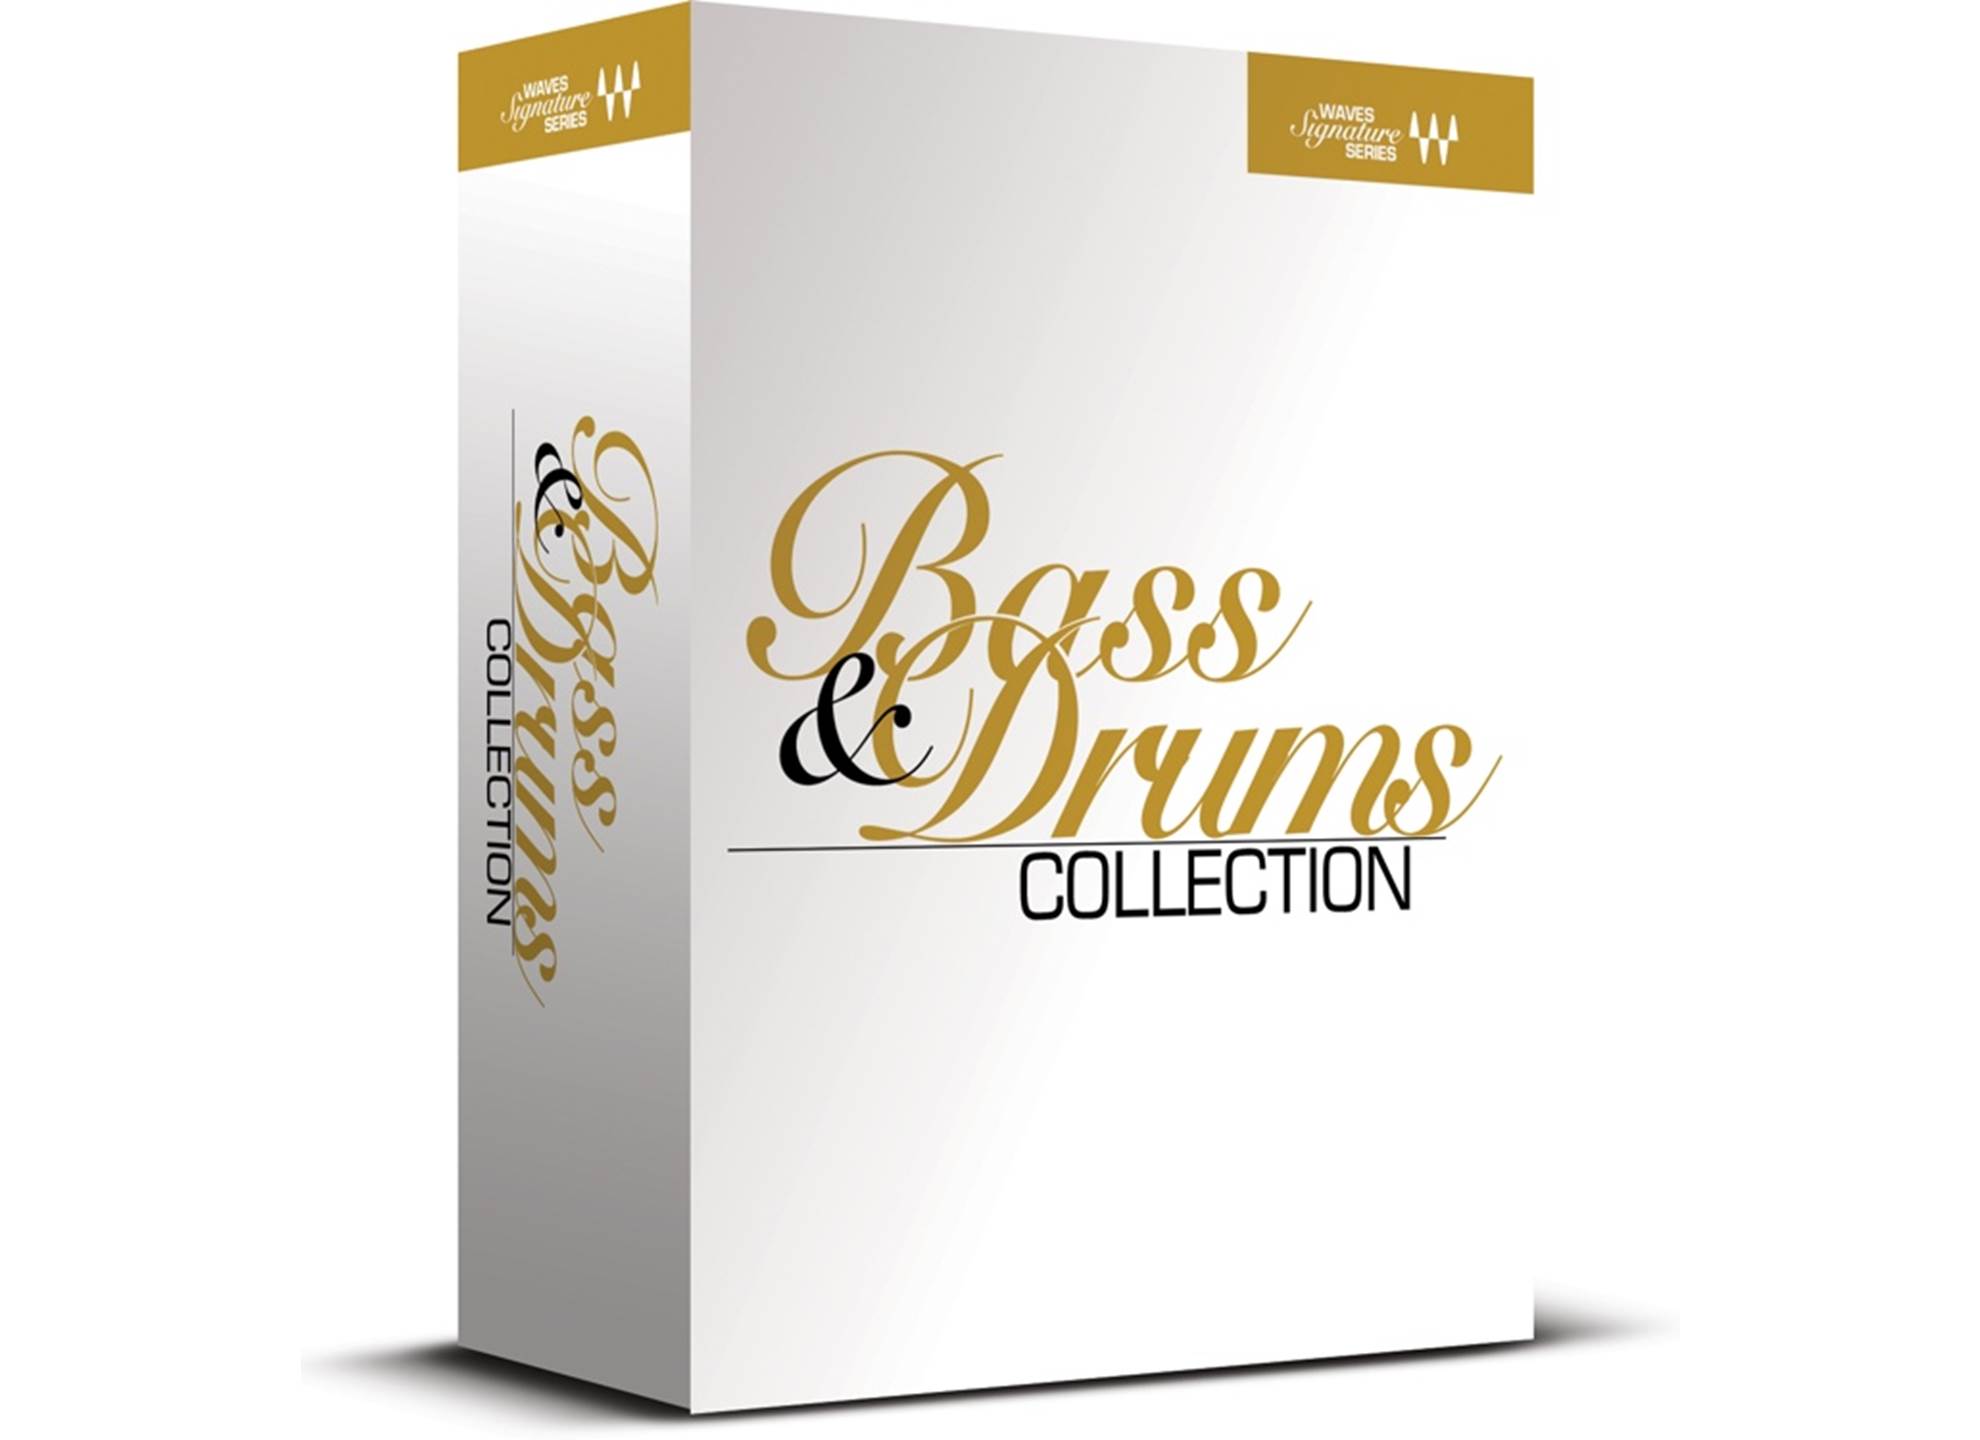 Signature Series Bass & Drums Collection